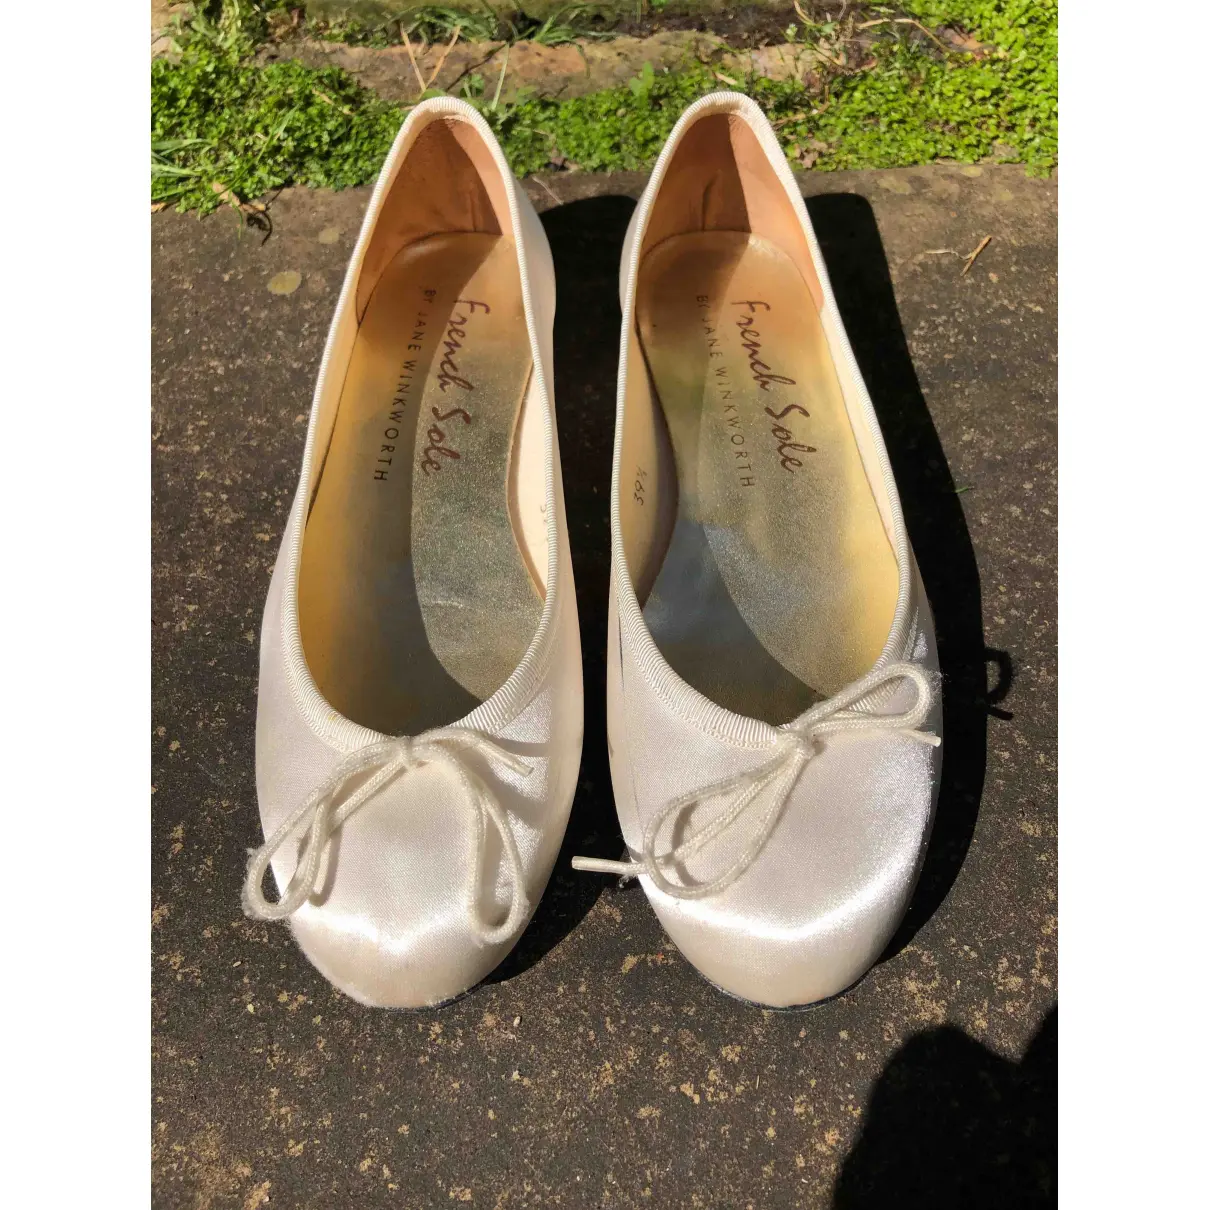 Buy French Sole Cloth ballet flats online